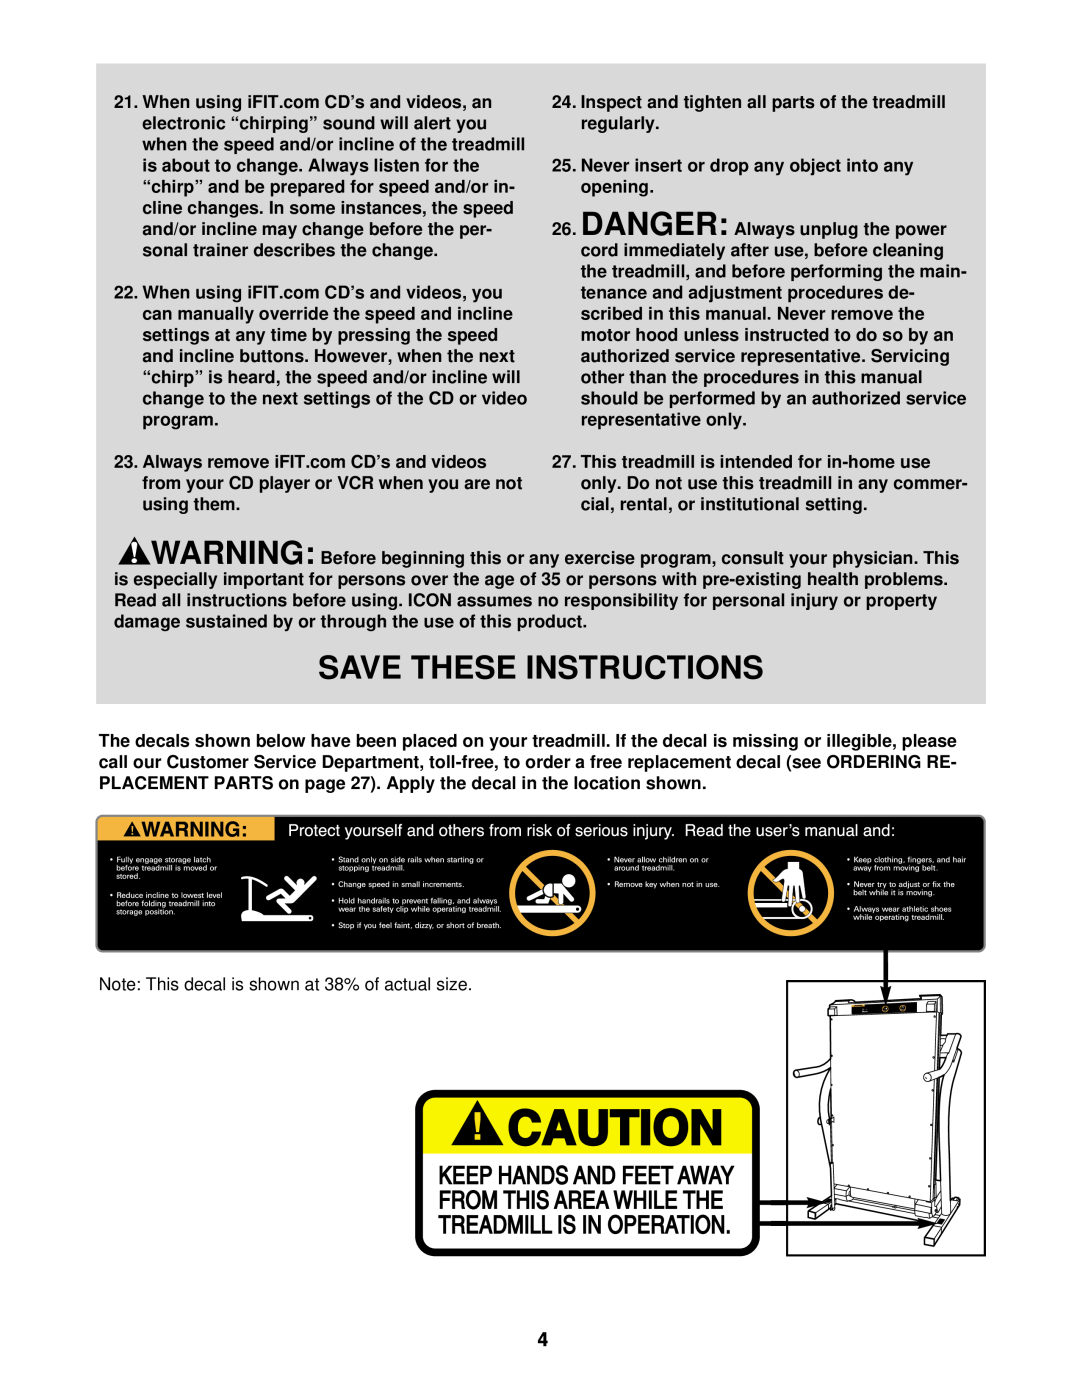 NordicTrack NTTL09610 user manual Save These Instructions, Inspect and tighten all parts of the treadmill regularly 